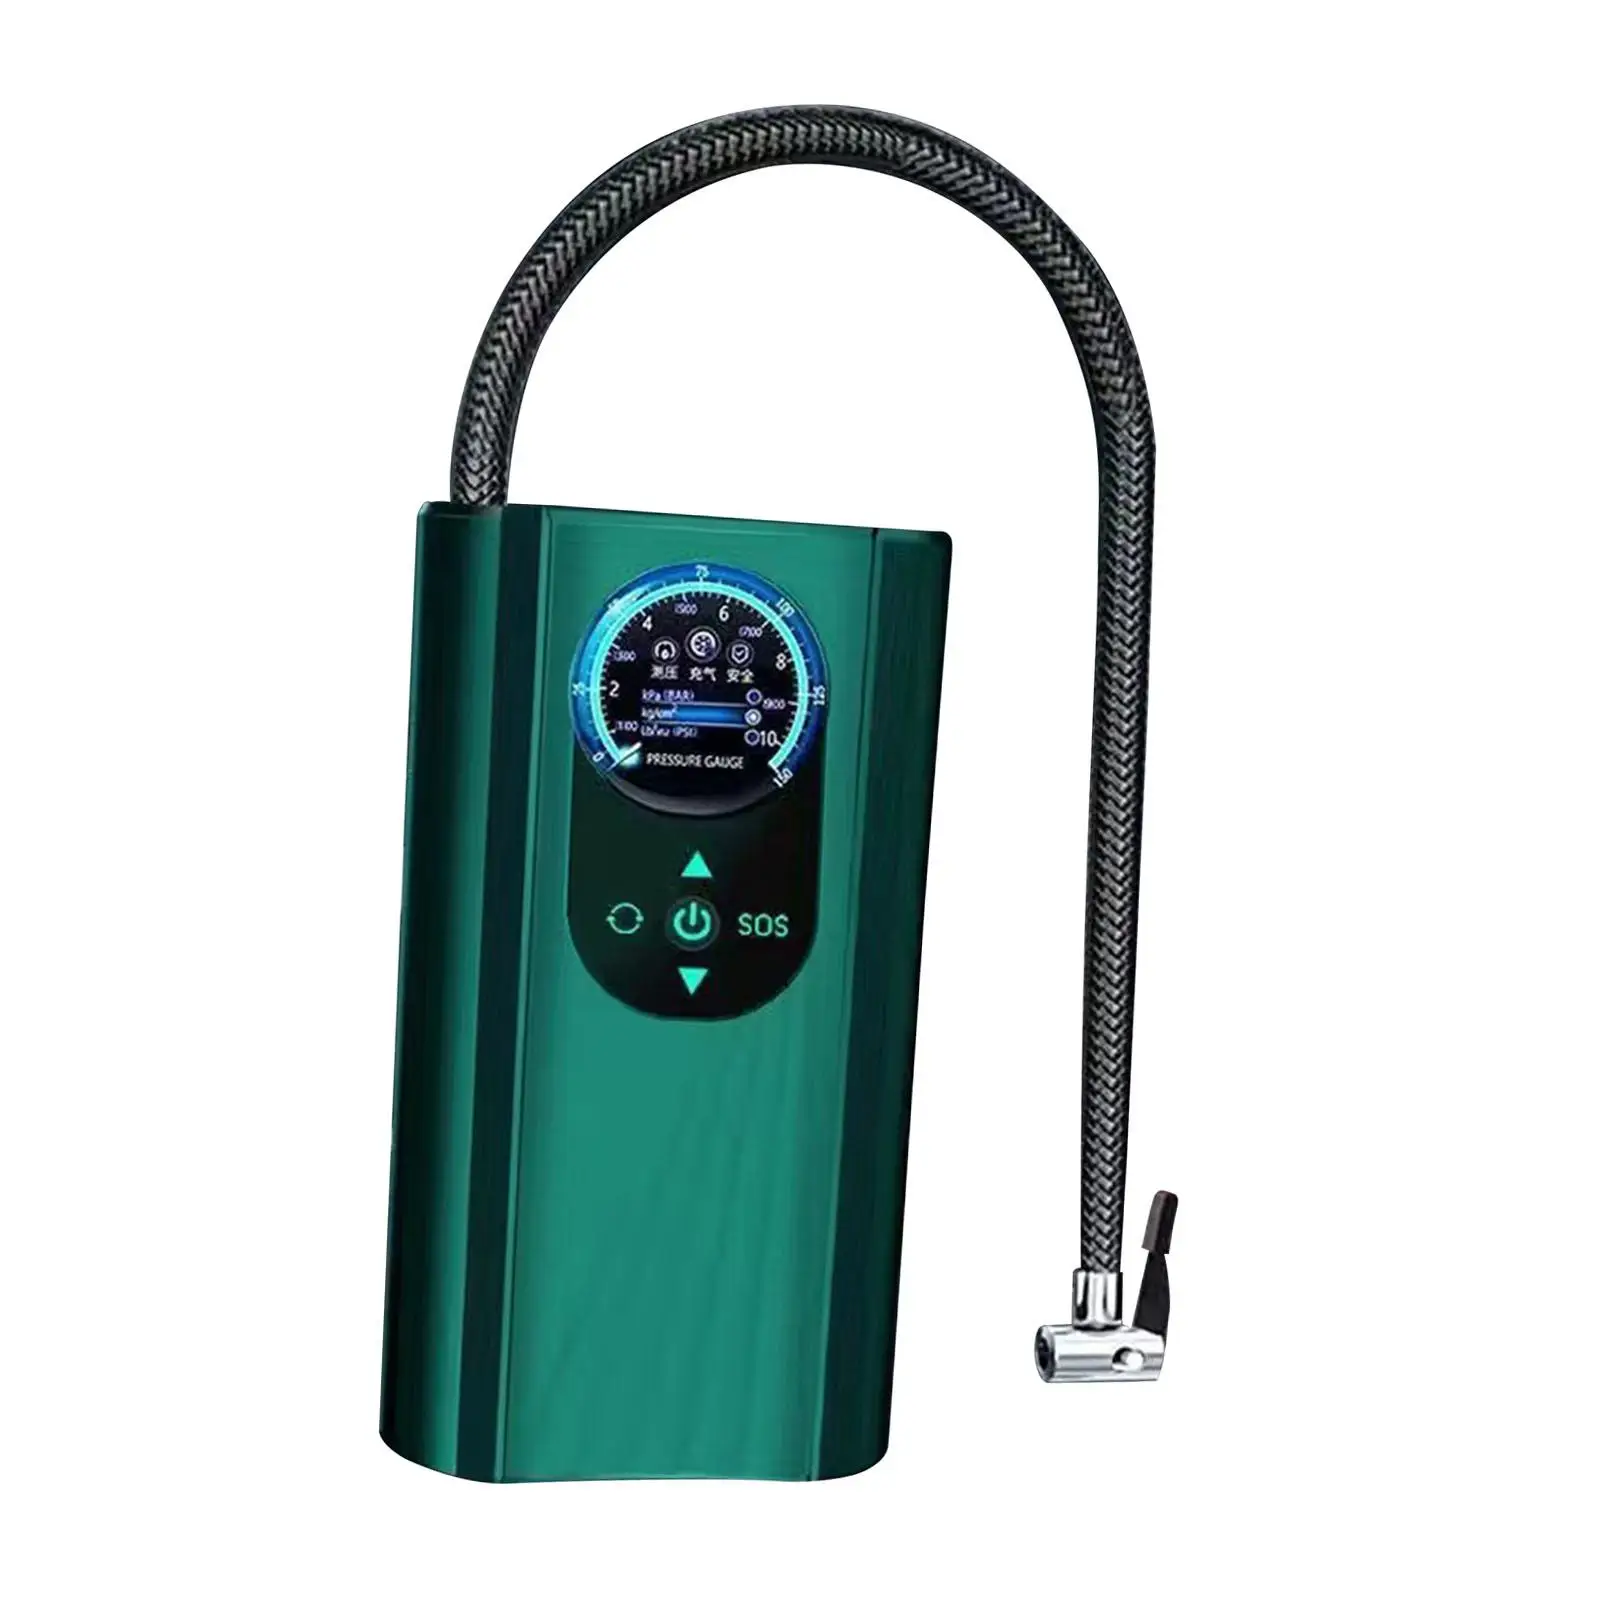 Portable Air Compressor Mini Auto Accessories with Pressure Gauge Electric Tire Pump for Bicycle Car Bike Ball Basketball